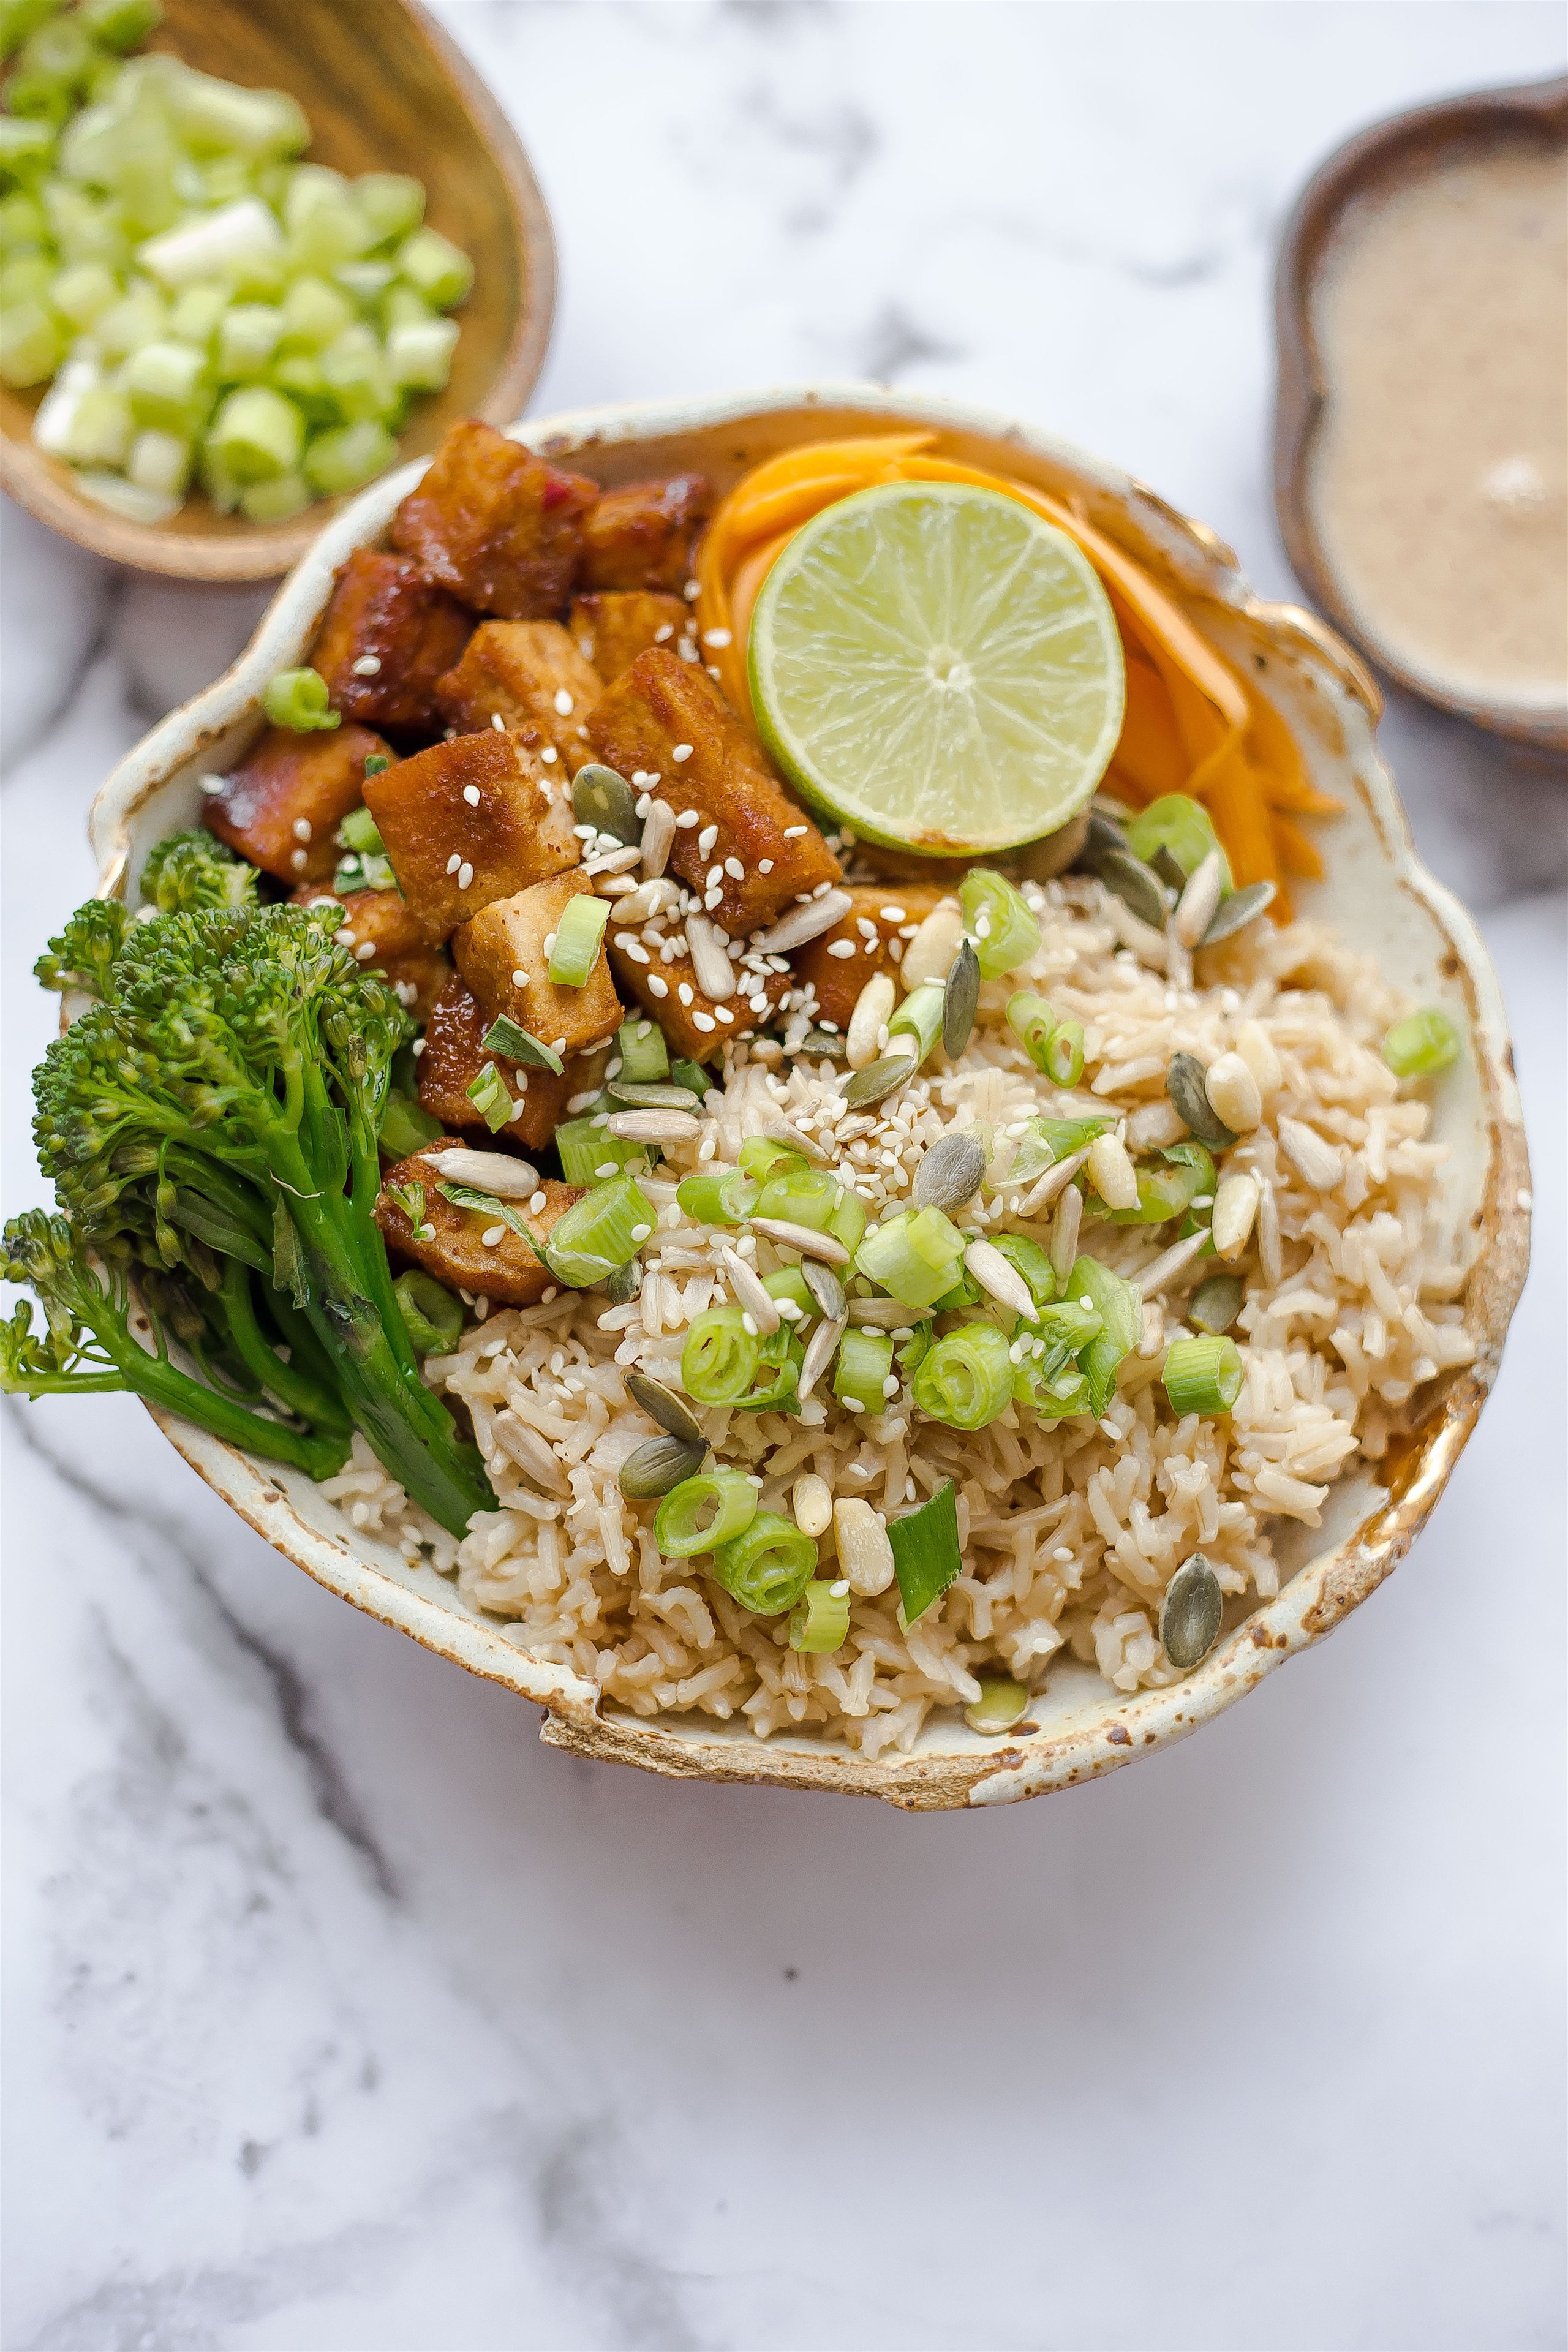 Tofu pieces with rice and veg in a bowl